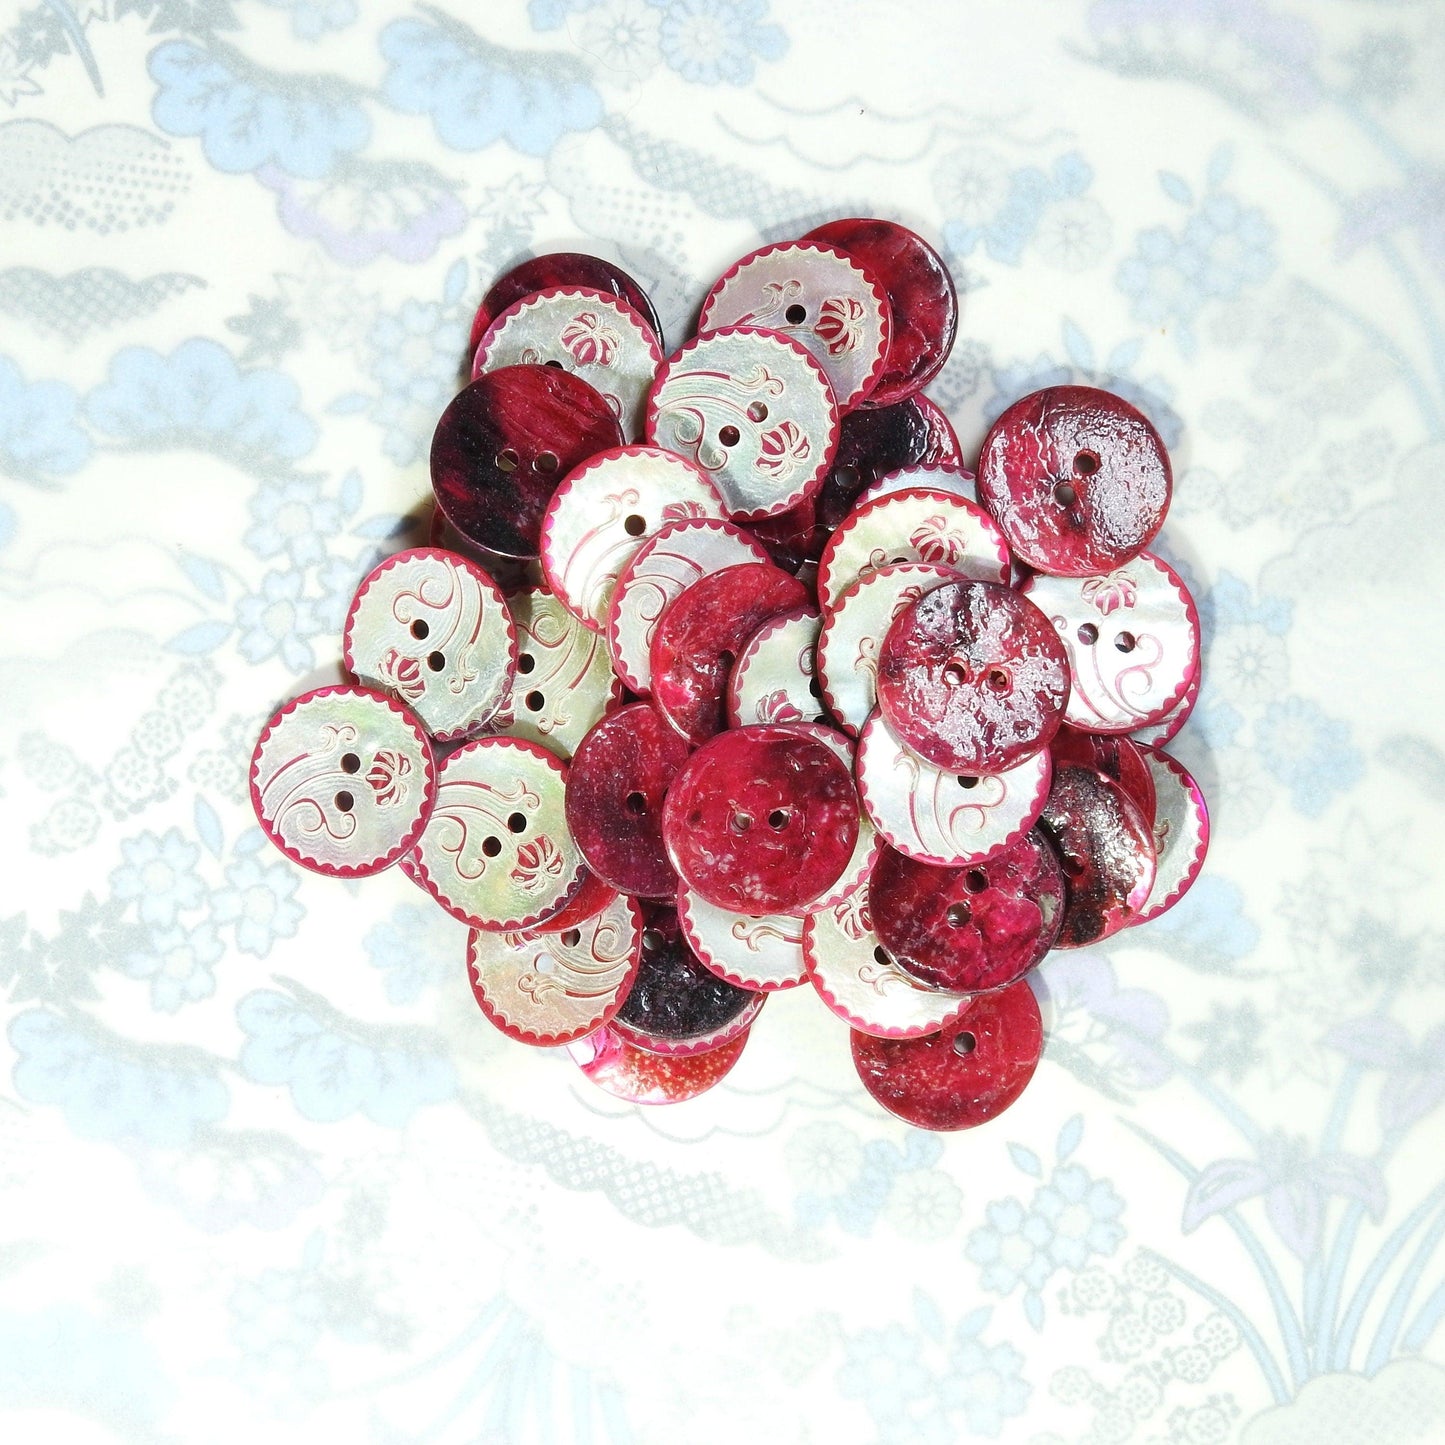 Lot of 50 red shell sewing buttons, vintage-inspired, flat, made from pearl, with a hibiscus Hawaiian Aloha style flower on them, 15 mm